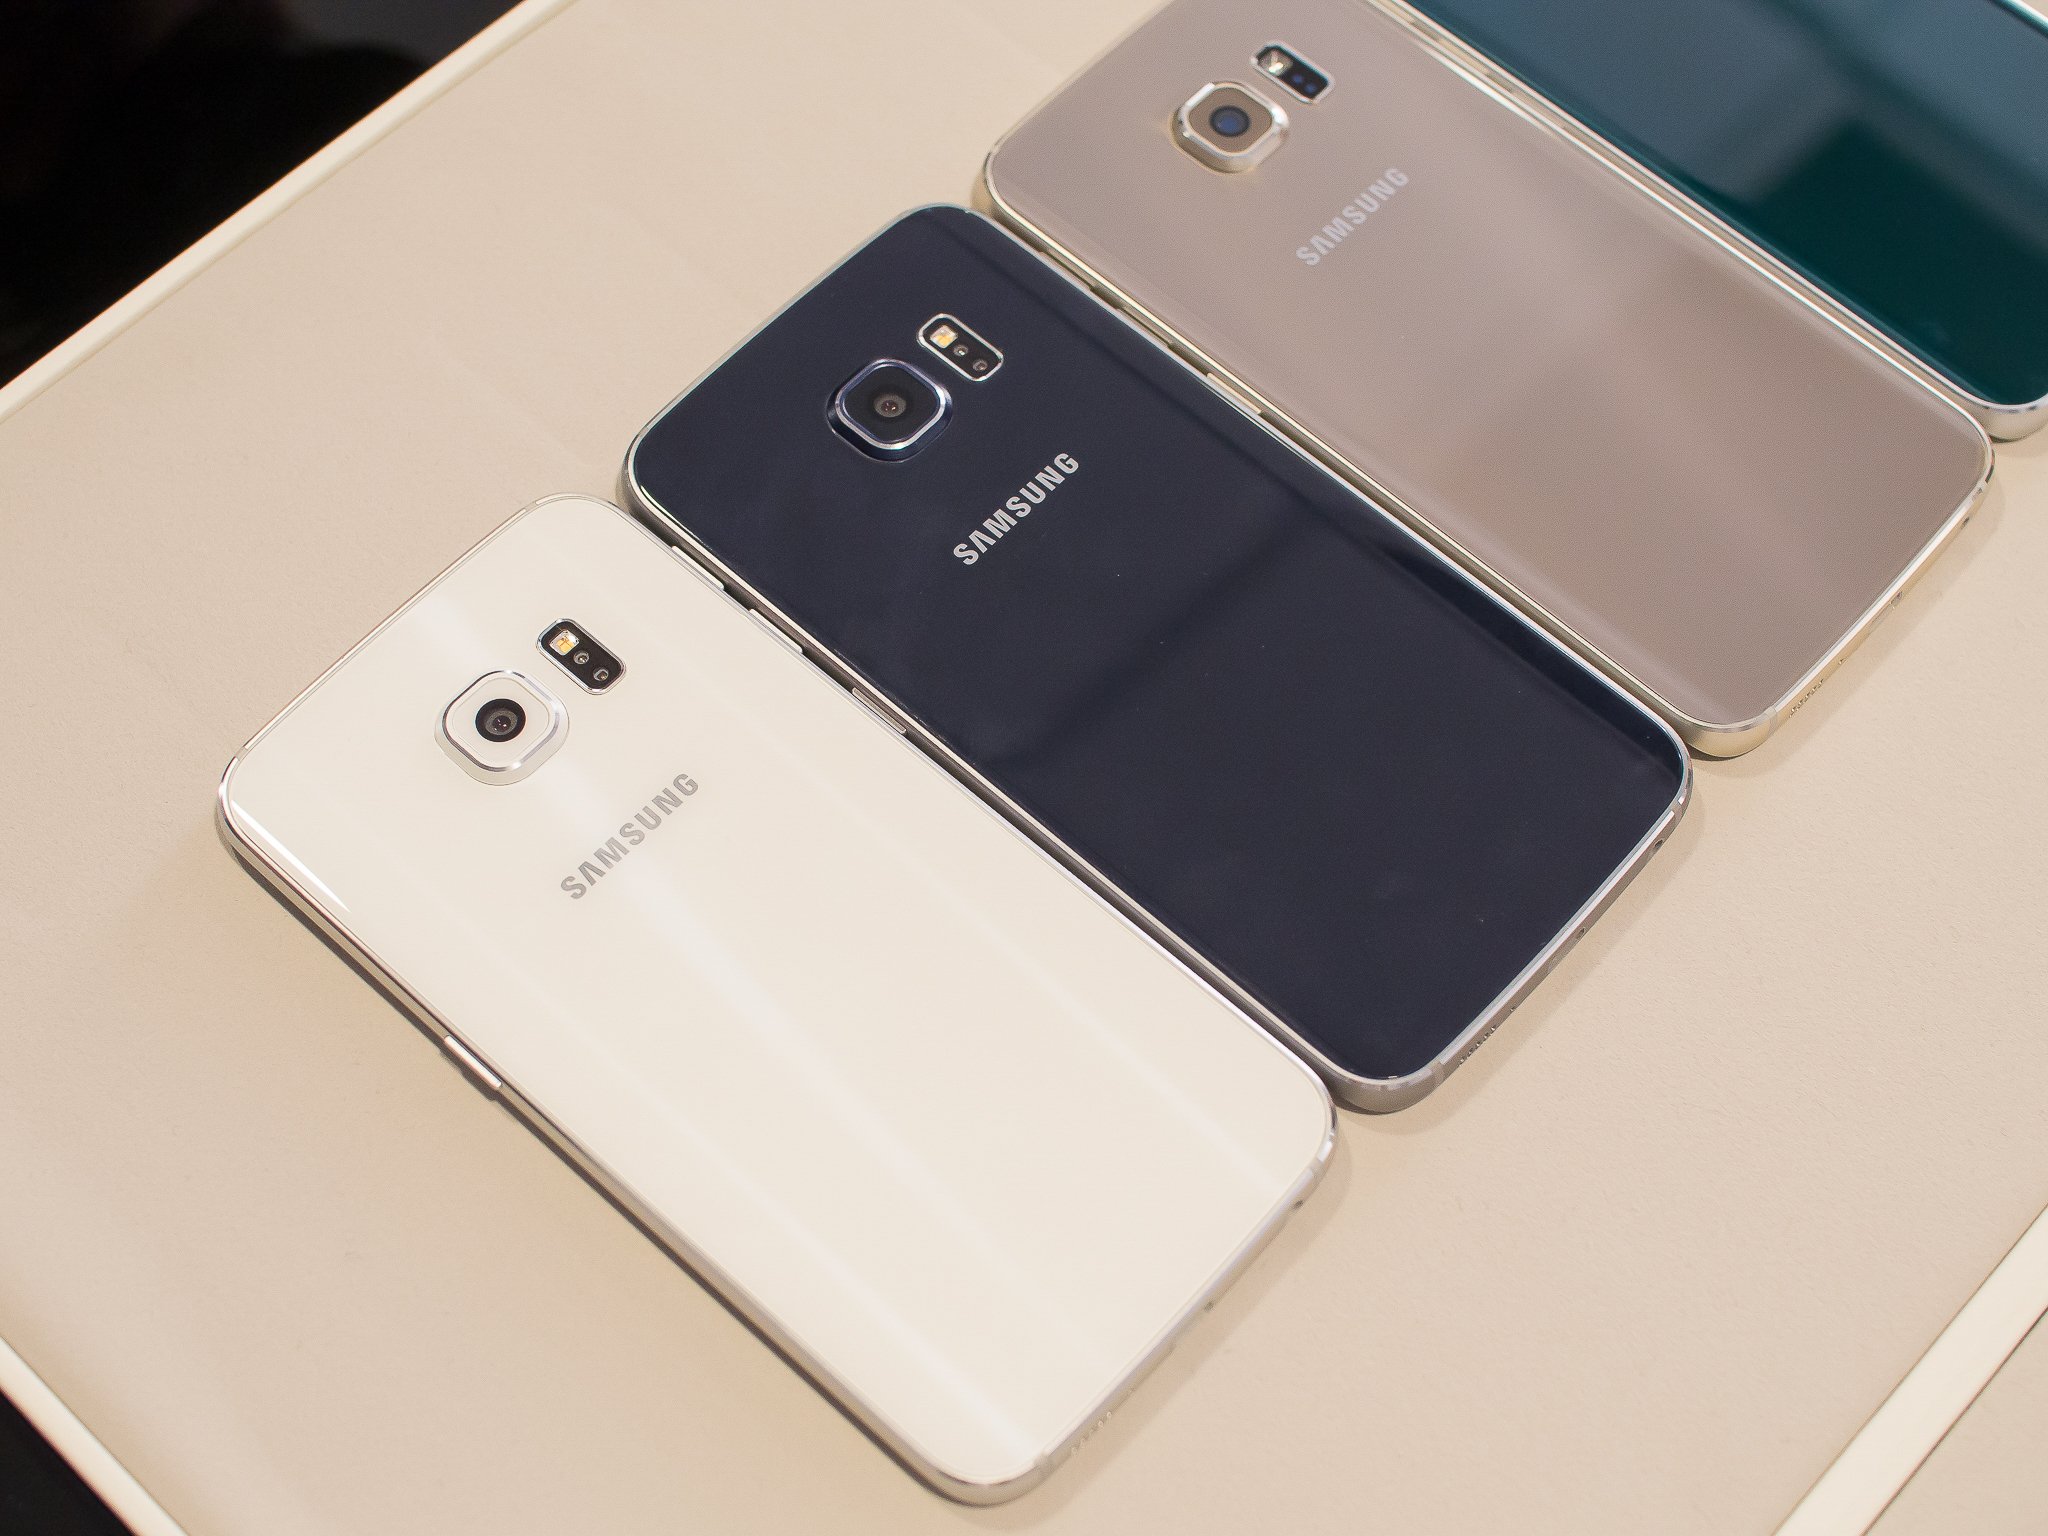 http://www.androidcentral.com/sites/androidcentral.com/files/styles/xlarge_wm_brw/public/article_images/2015/02/galaxy-s6-four-colors-4-9zh2jqc.jpg